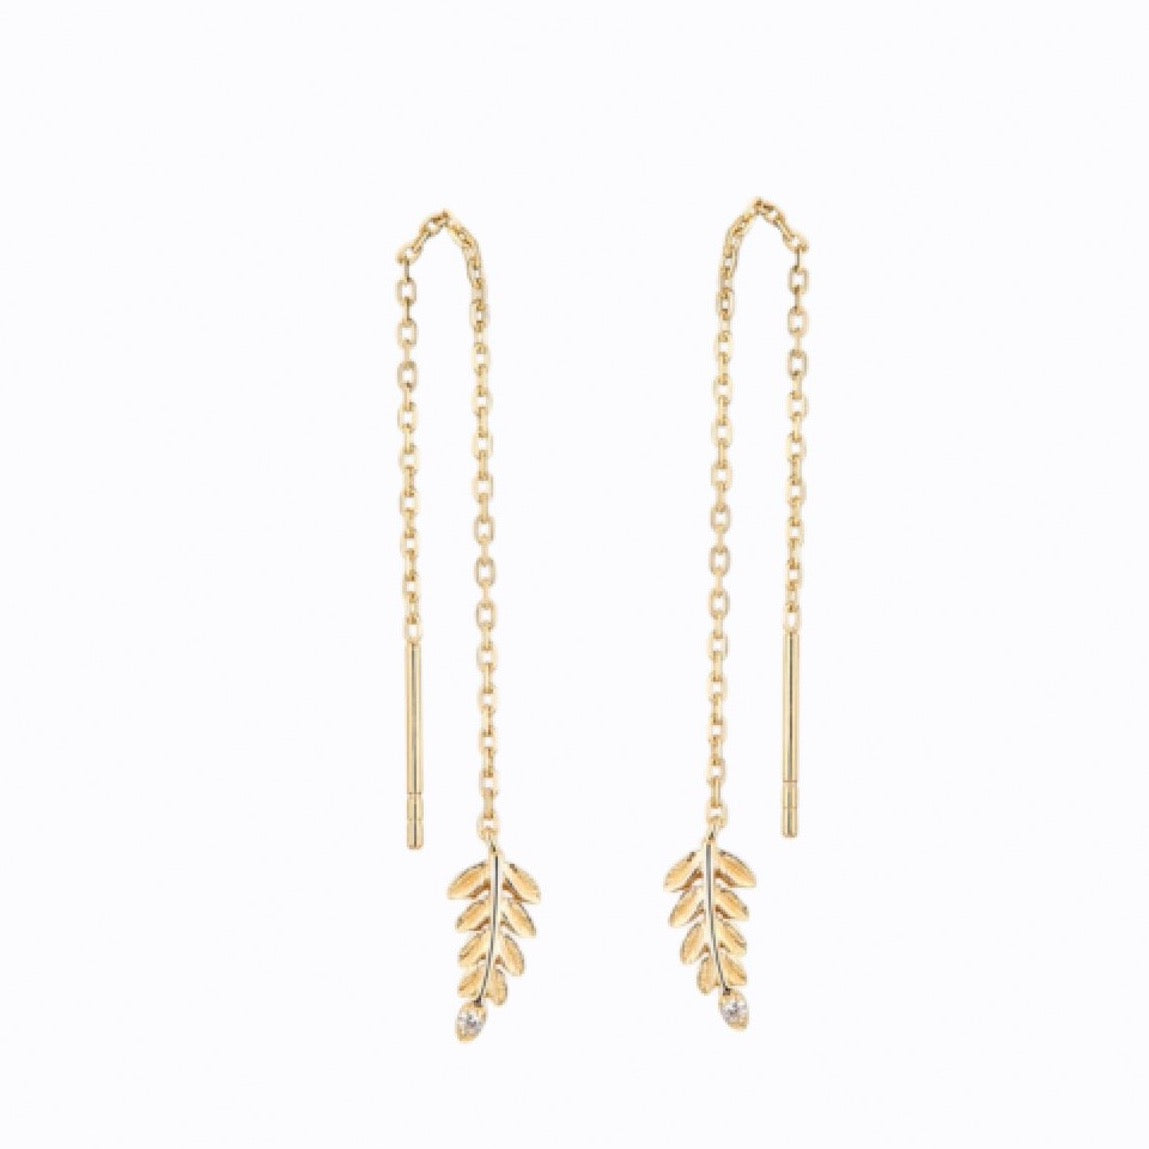 Gold Leaf Drop Earrings, 14ct Gold Plate